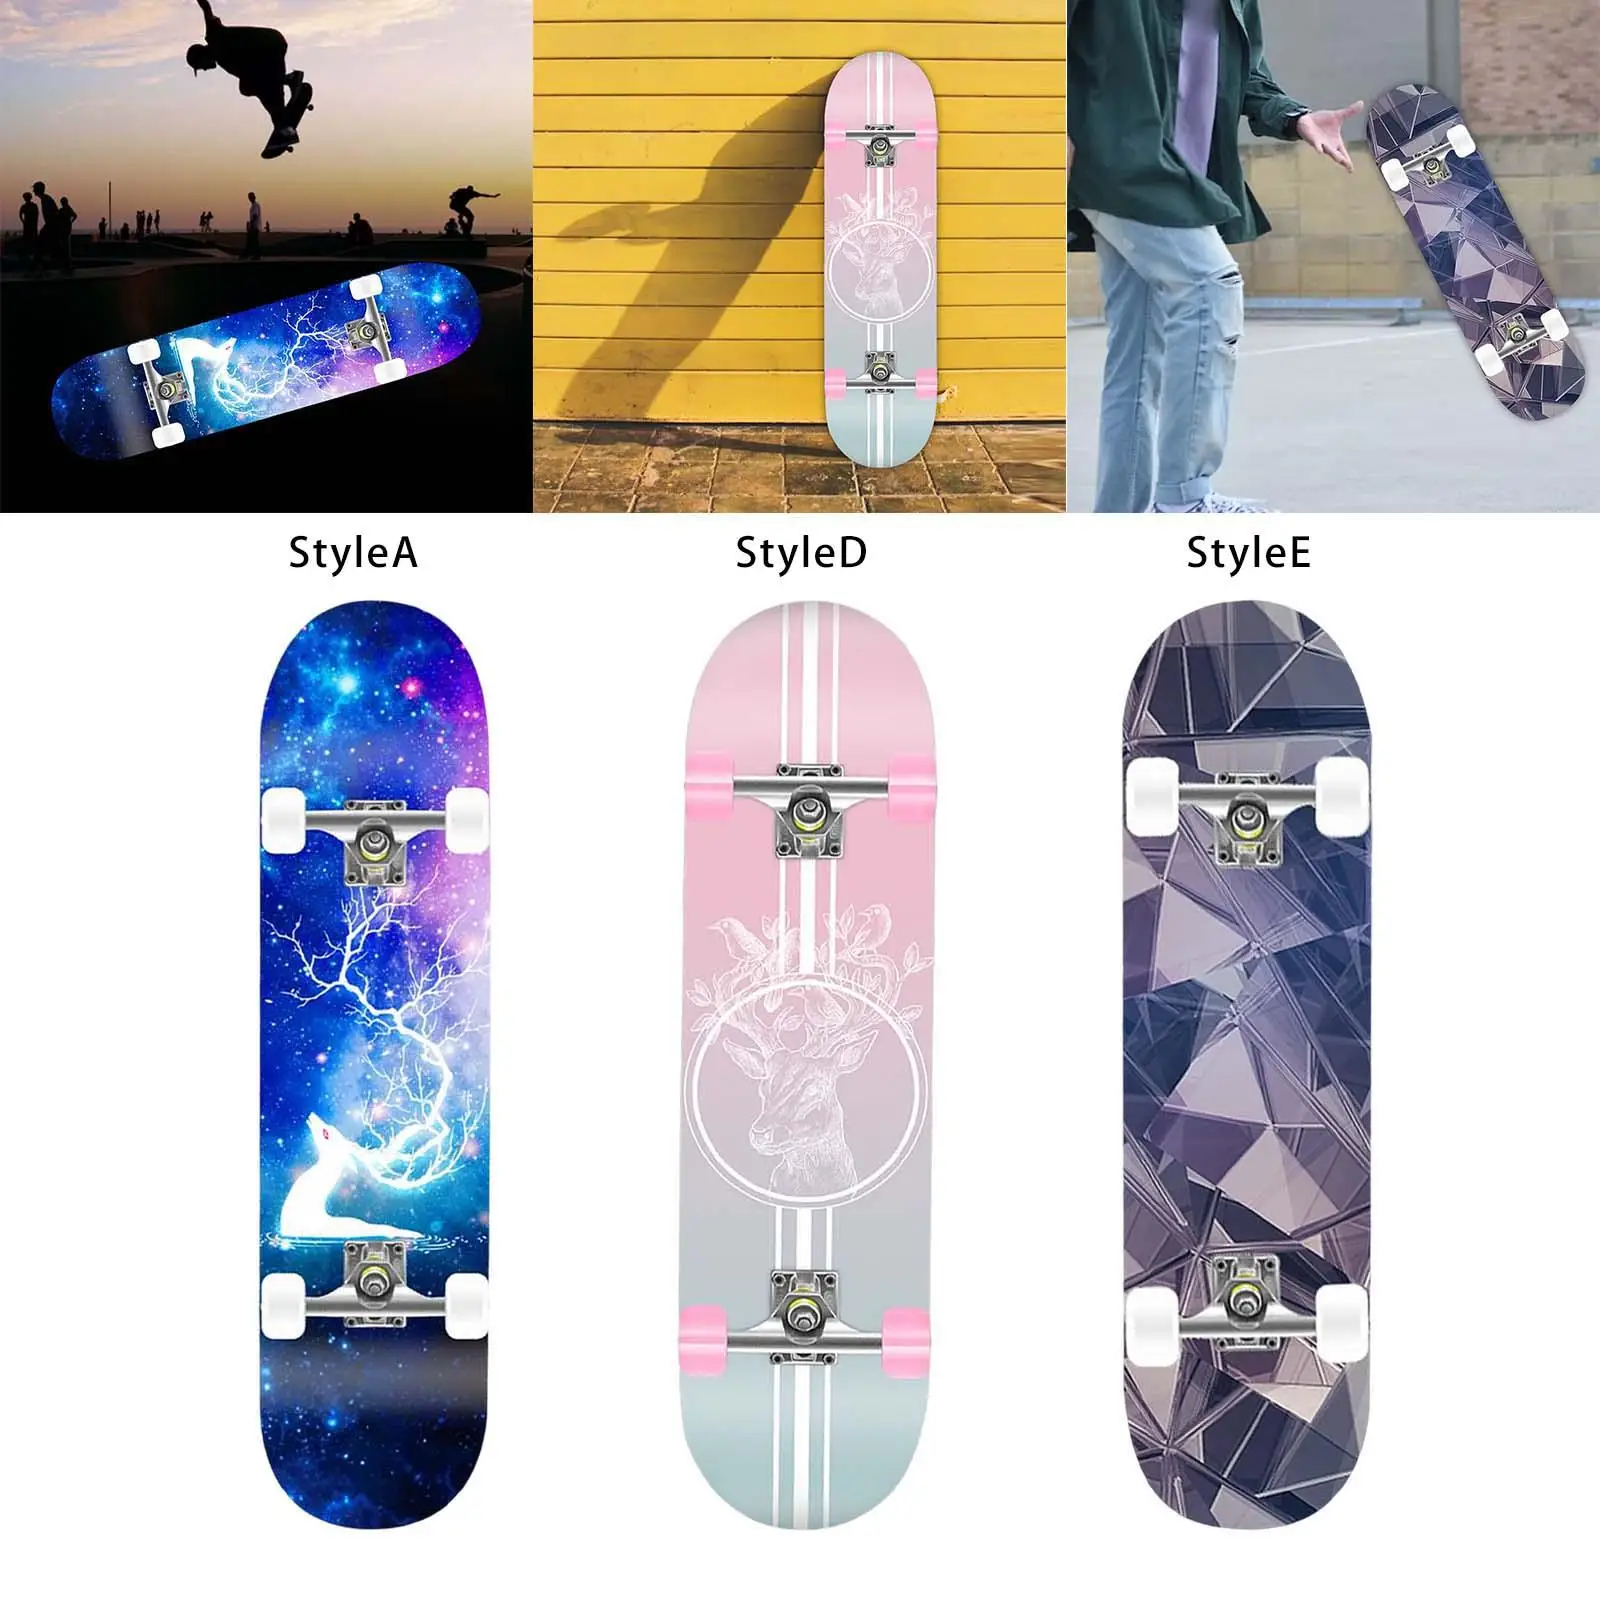 Complete Skateboard Double Kick Fully Steel Bearing 31 inch Maple Longboard Concave for Beginners Kids Teens Playing